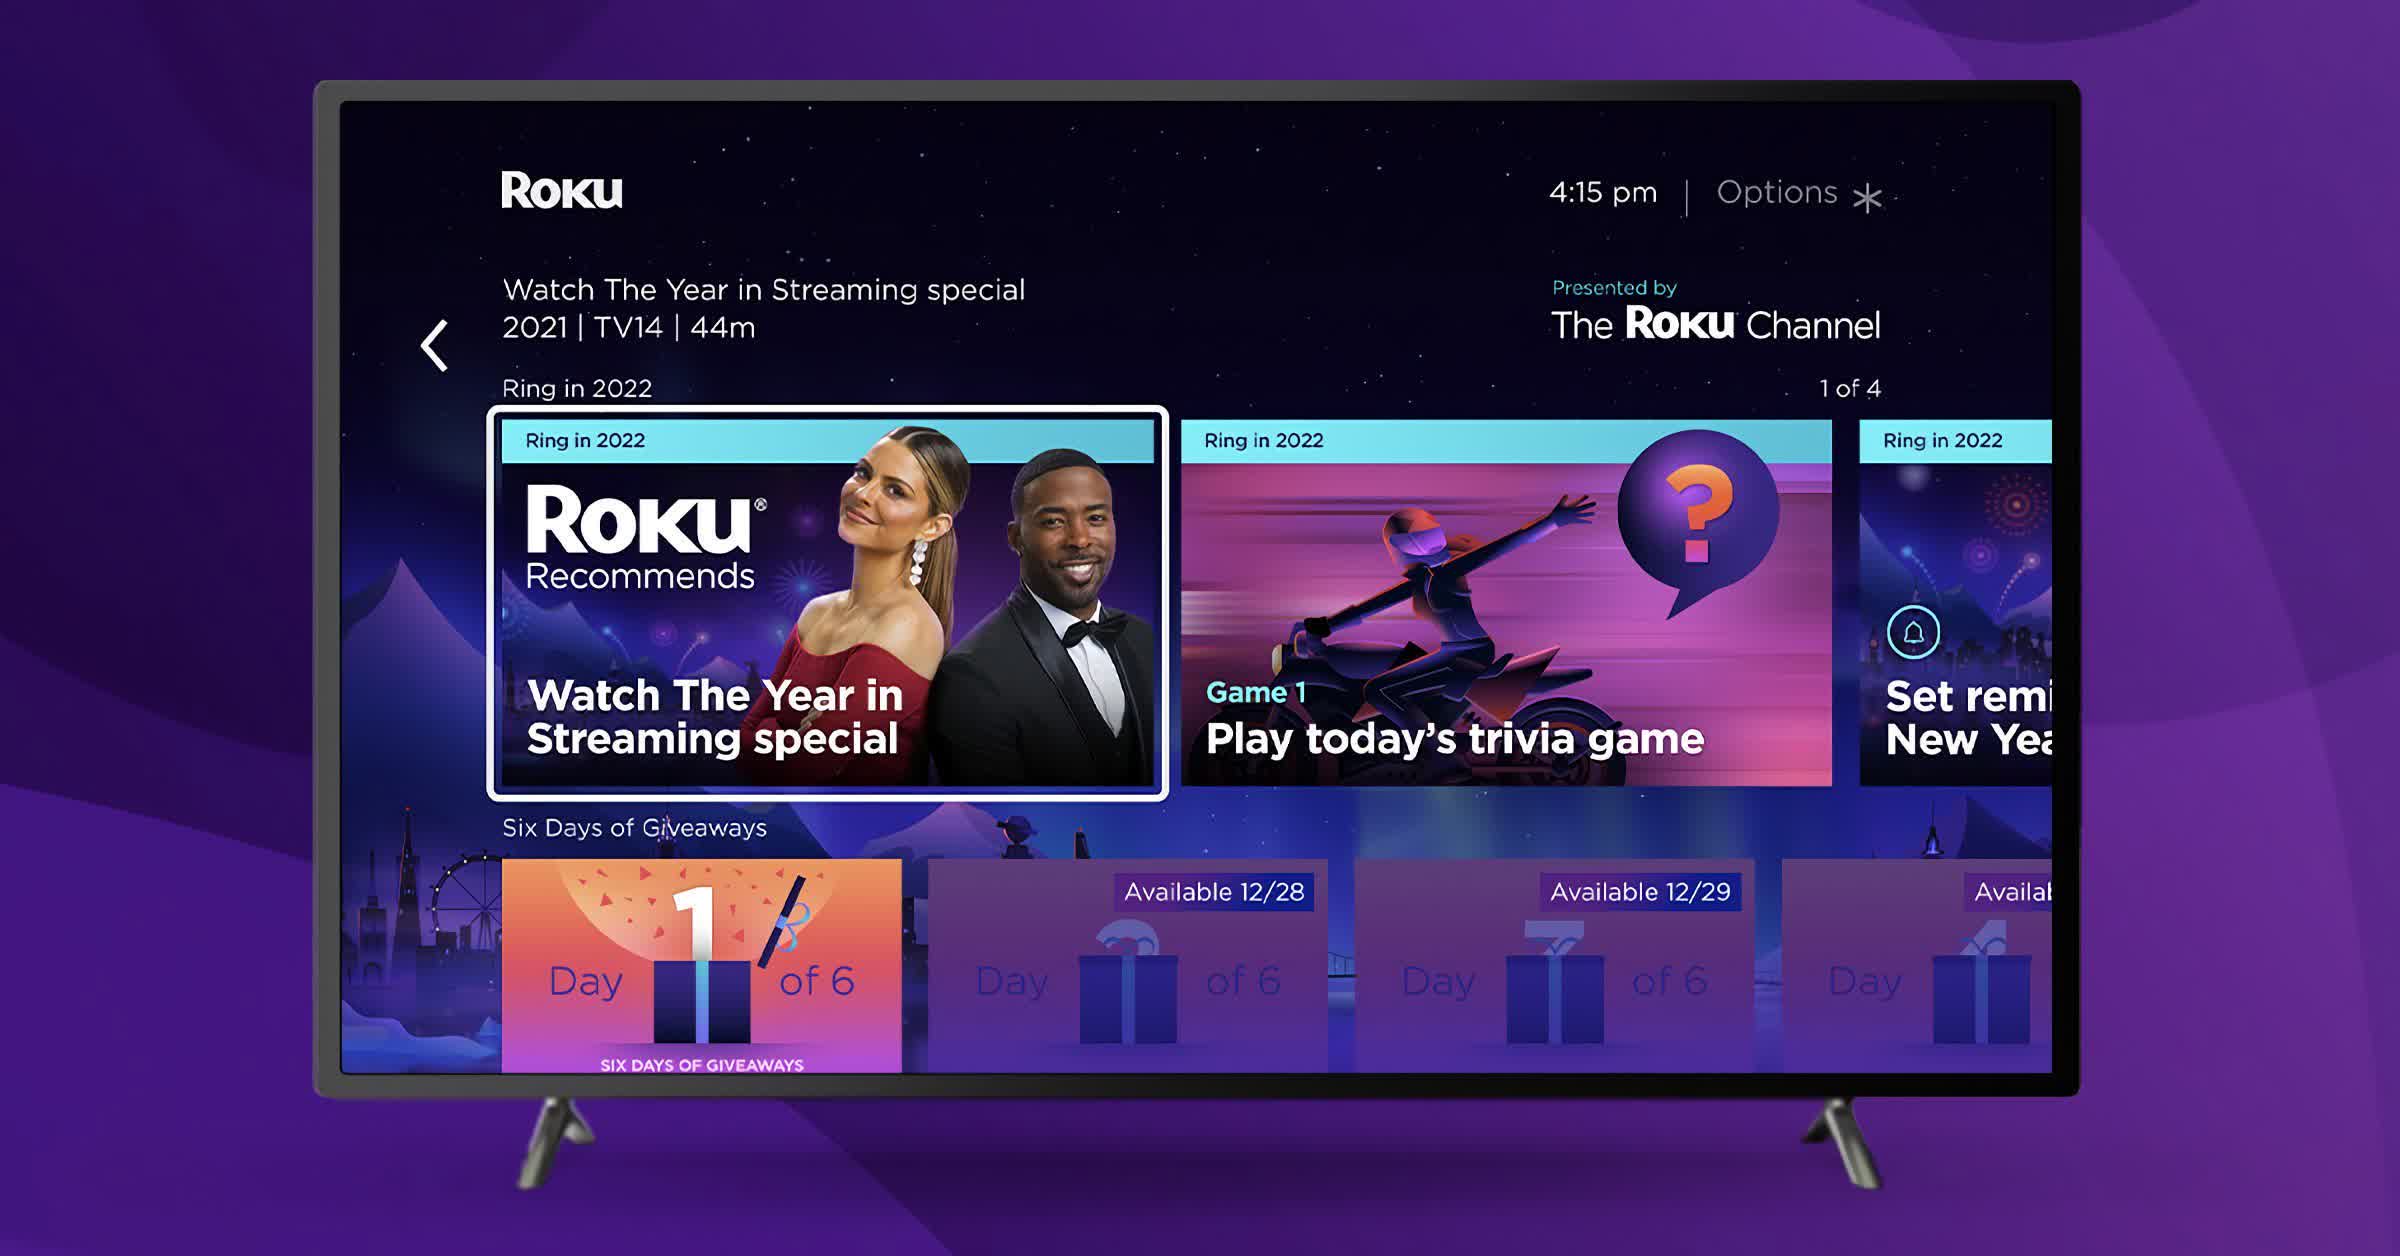 Roku is running interactive pop-up ads during live TV broadcasts